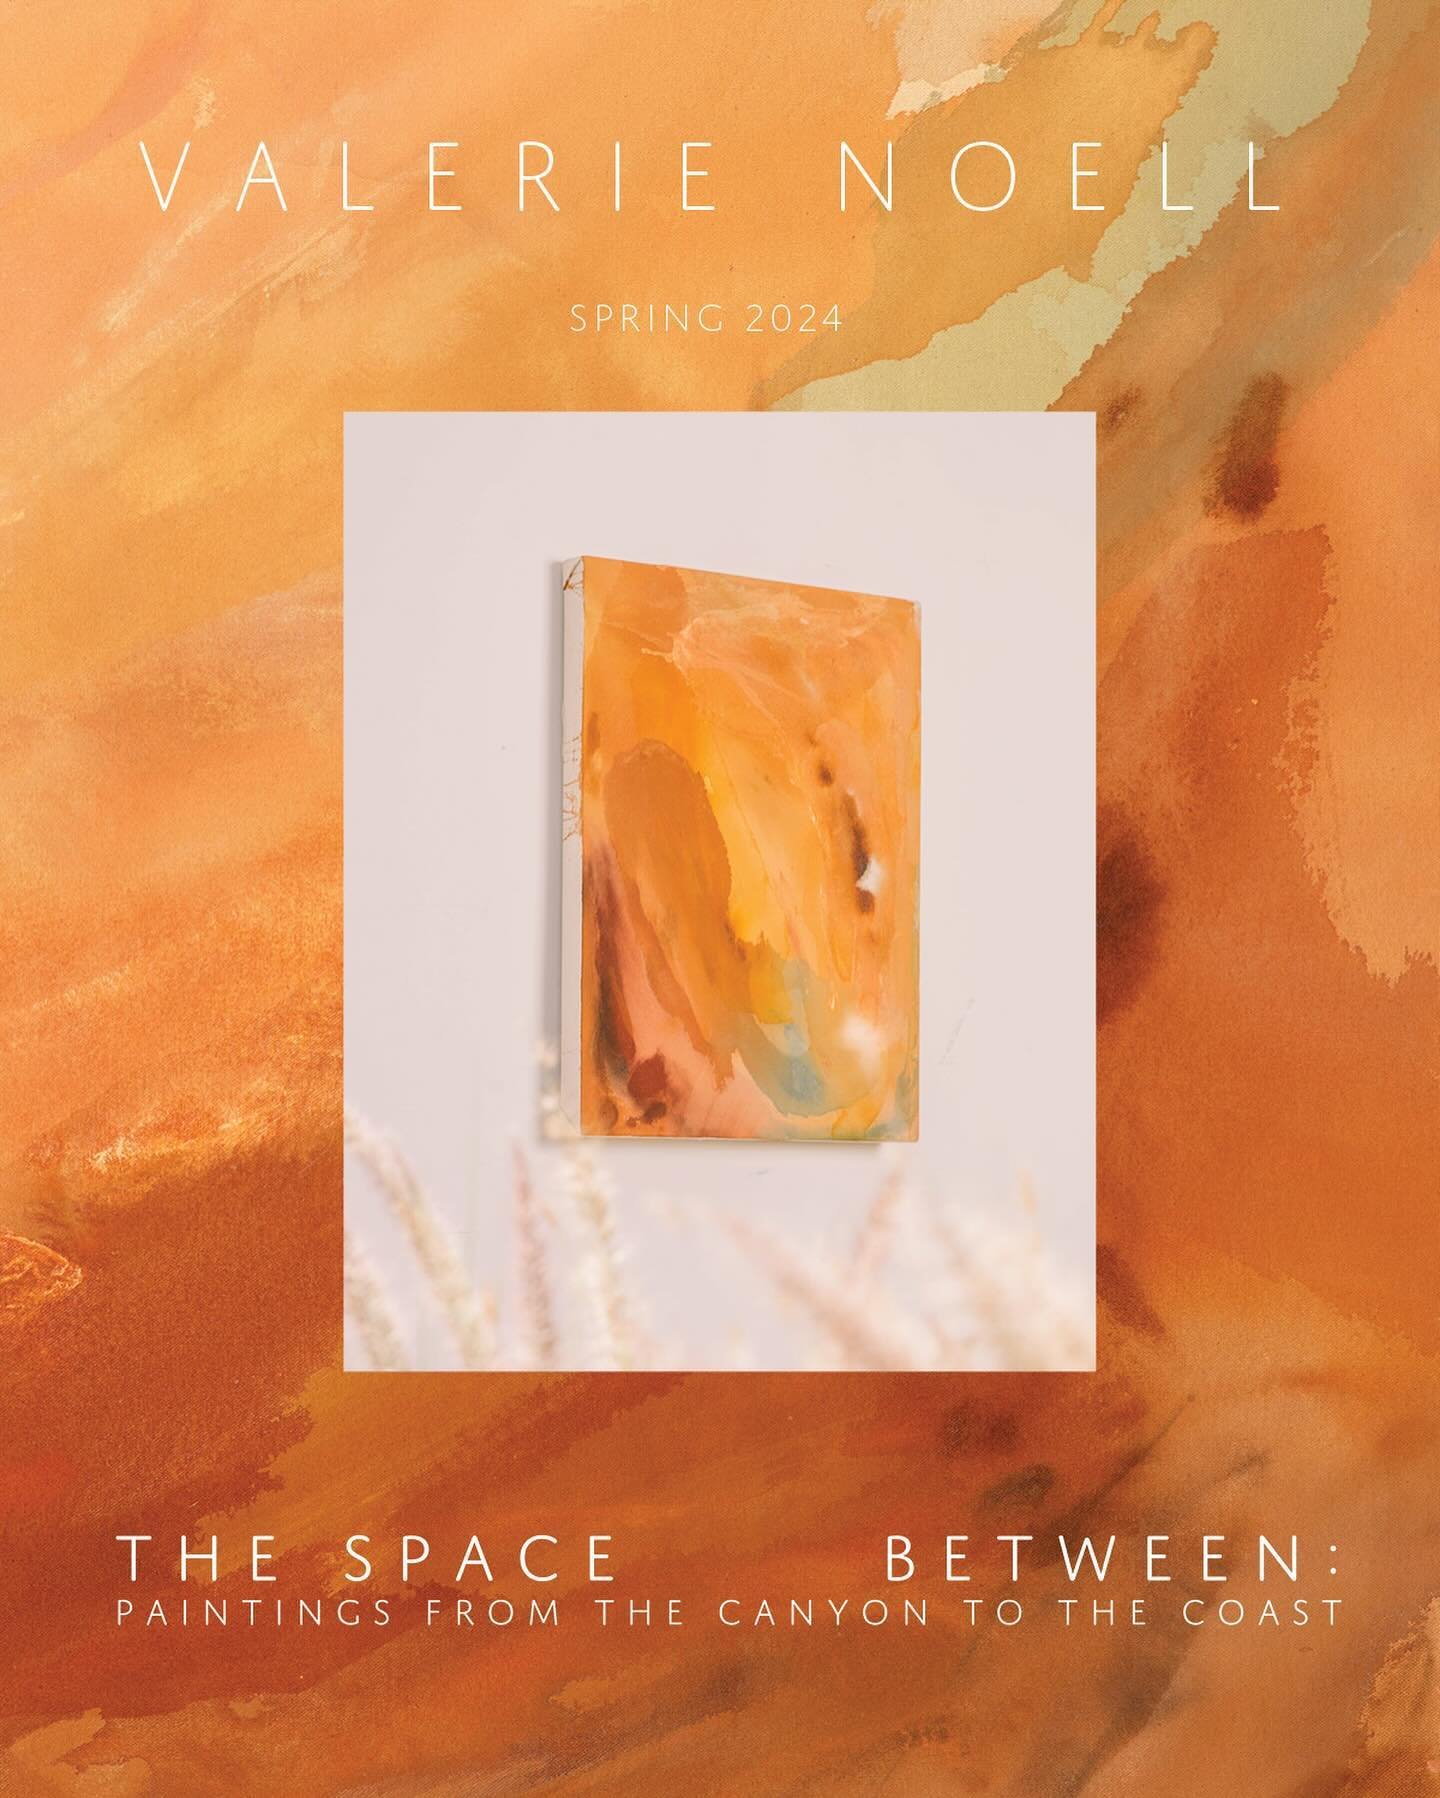 The Space Between: Paintings from the Canyons to the Coast is a collection of works inspired by the in between places and moments in time, when you are not quite yet where you are going. The hidden spots between the city lights and canyons, where you